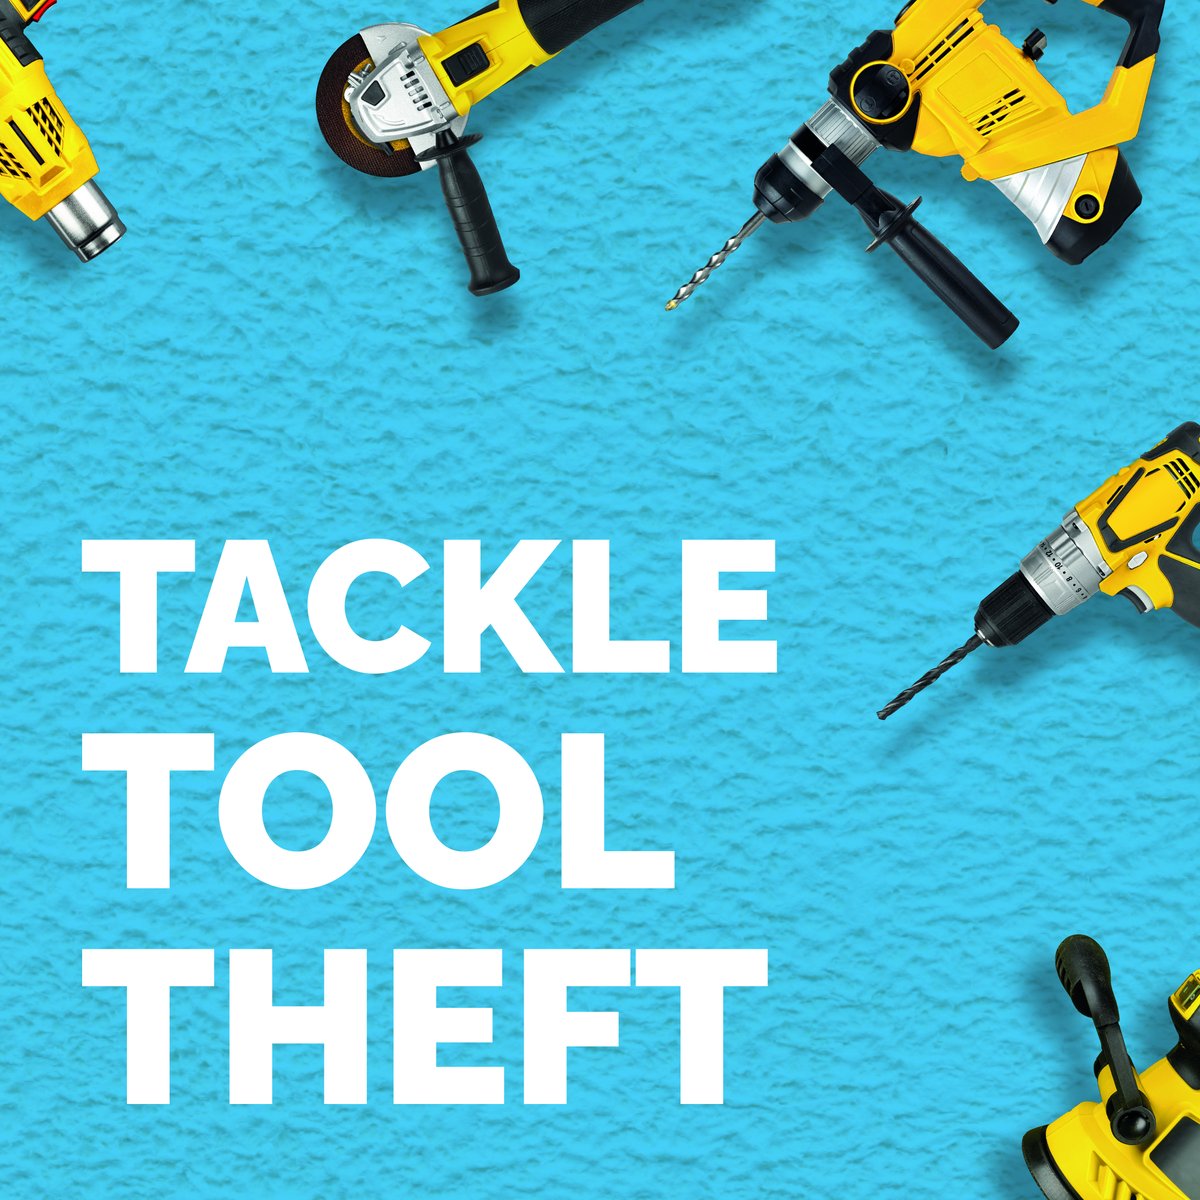 Did you know power tools sold at car boot sales could be stolen? Let's support the petition to limit their sale at car boots, and markets. Together, we'll make a difference! ✍️ow.ly/3VJa50RhaF8 #StopToolTheft #ProtectTradespeople #ScolmoreGroup #Scolmore